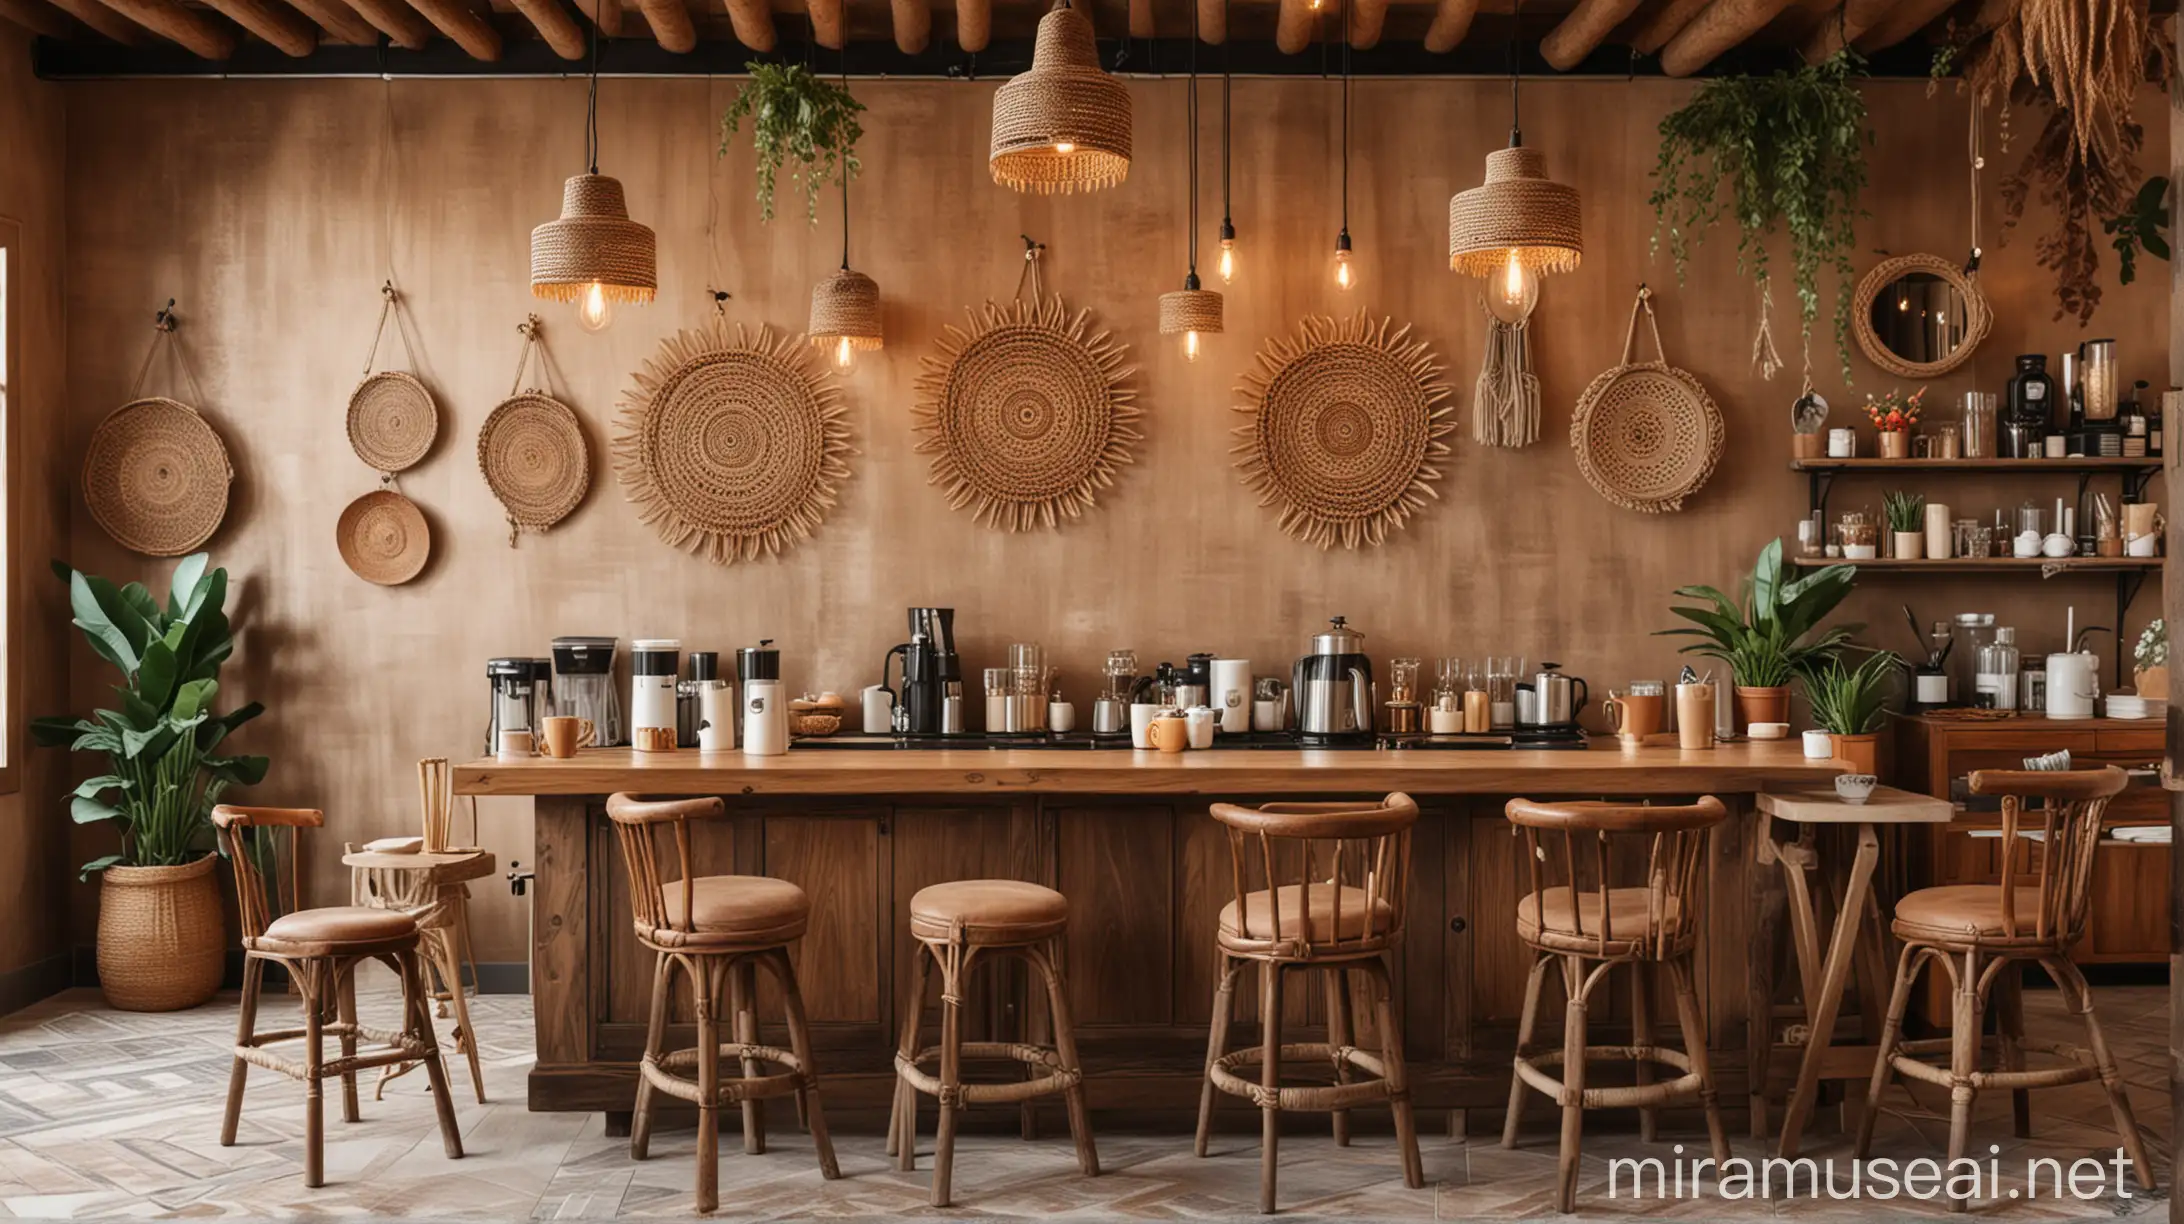 Boho Style Coffee Shop Interior Design with Cozy Ambiance